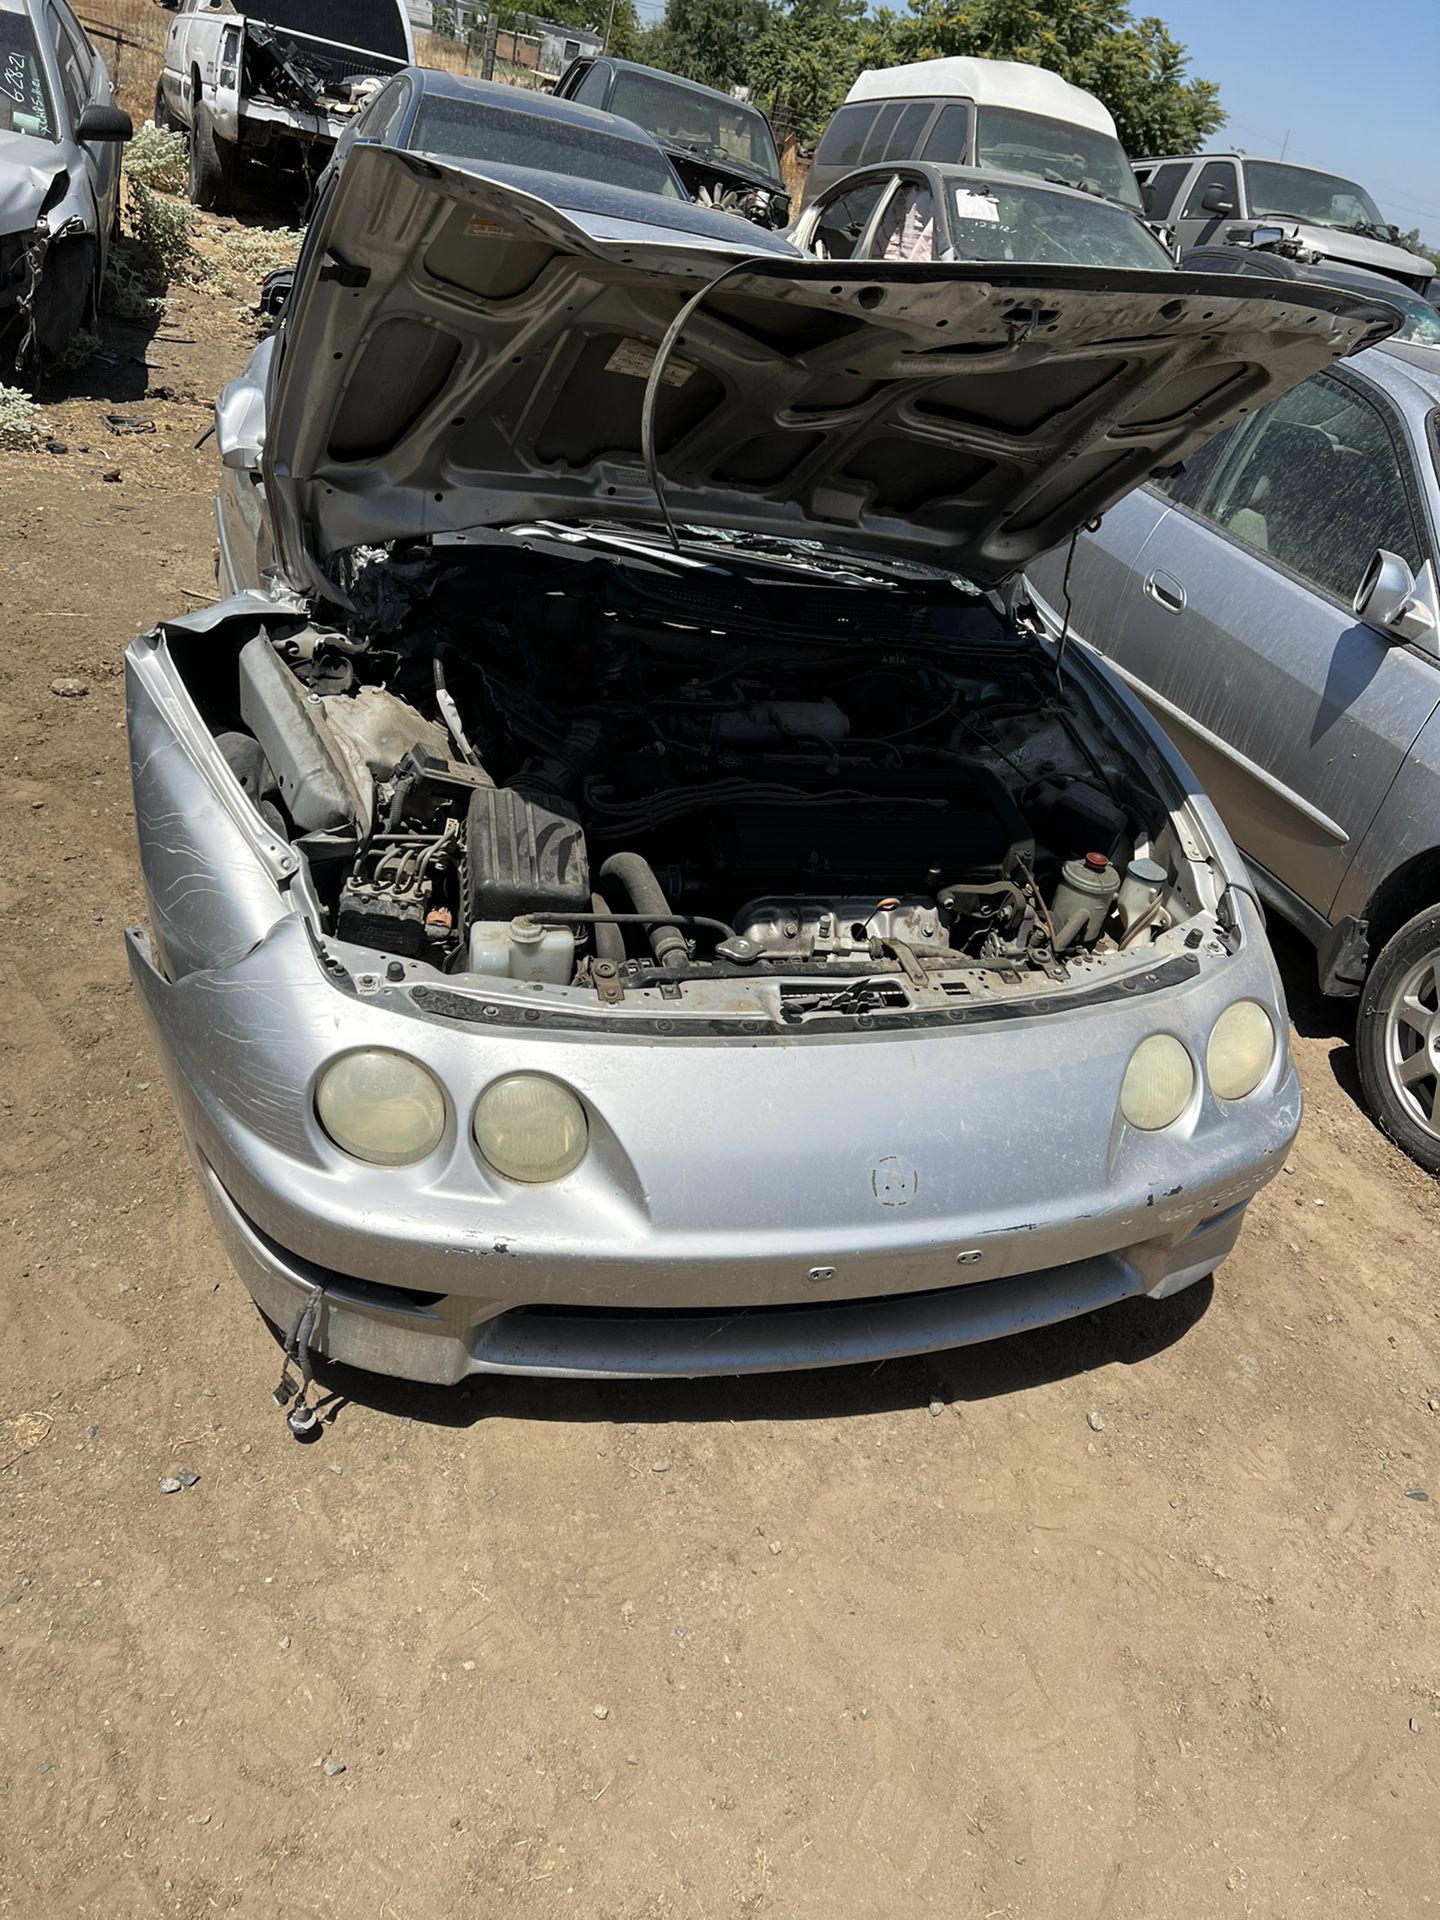 1998 Acura Integra Parts Parting Out 